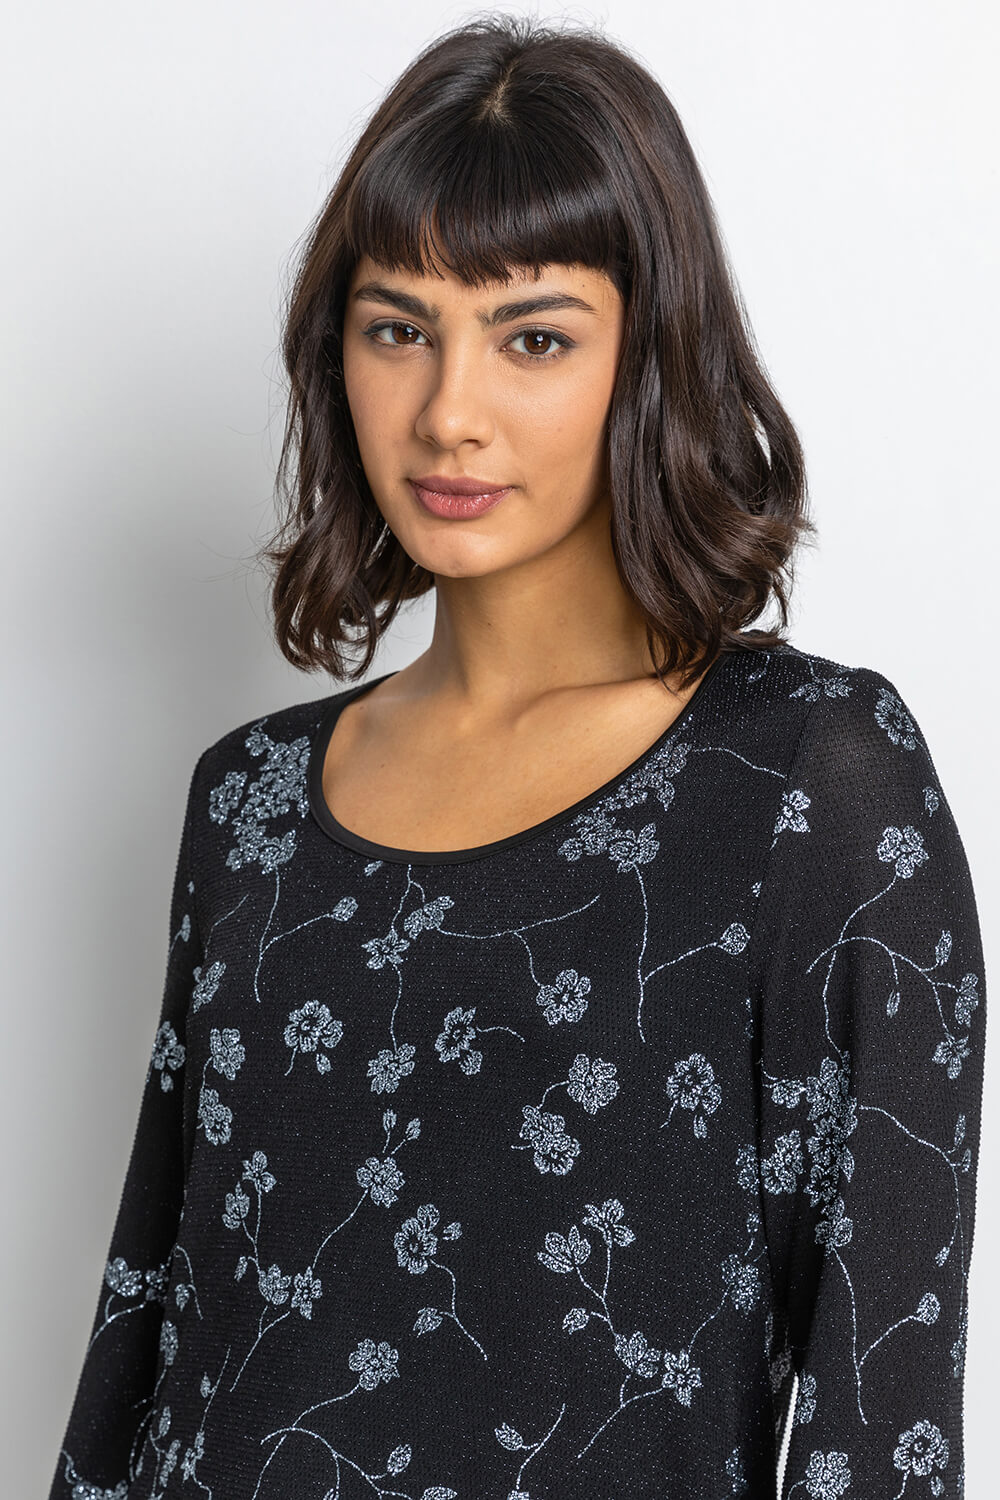 Silver Shimmer Floral Print Top, Image 2 of 5